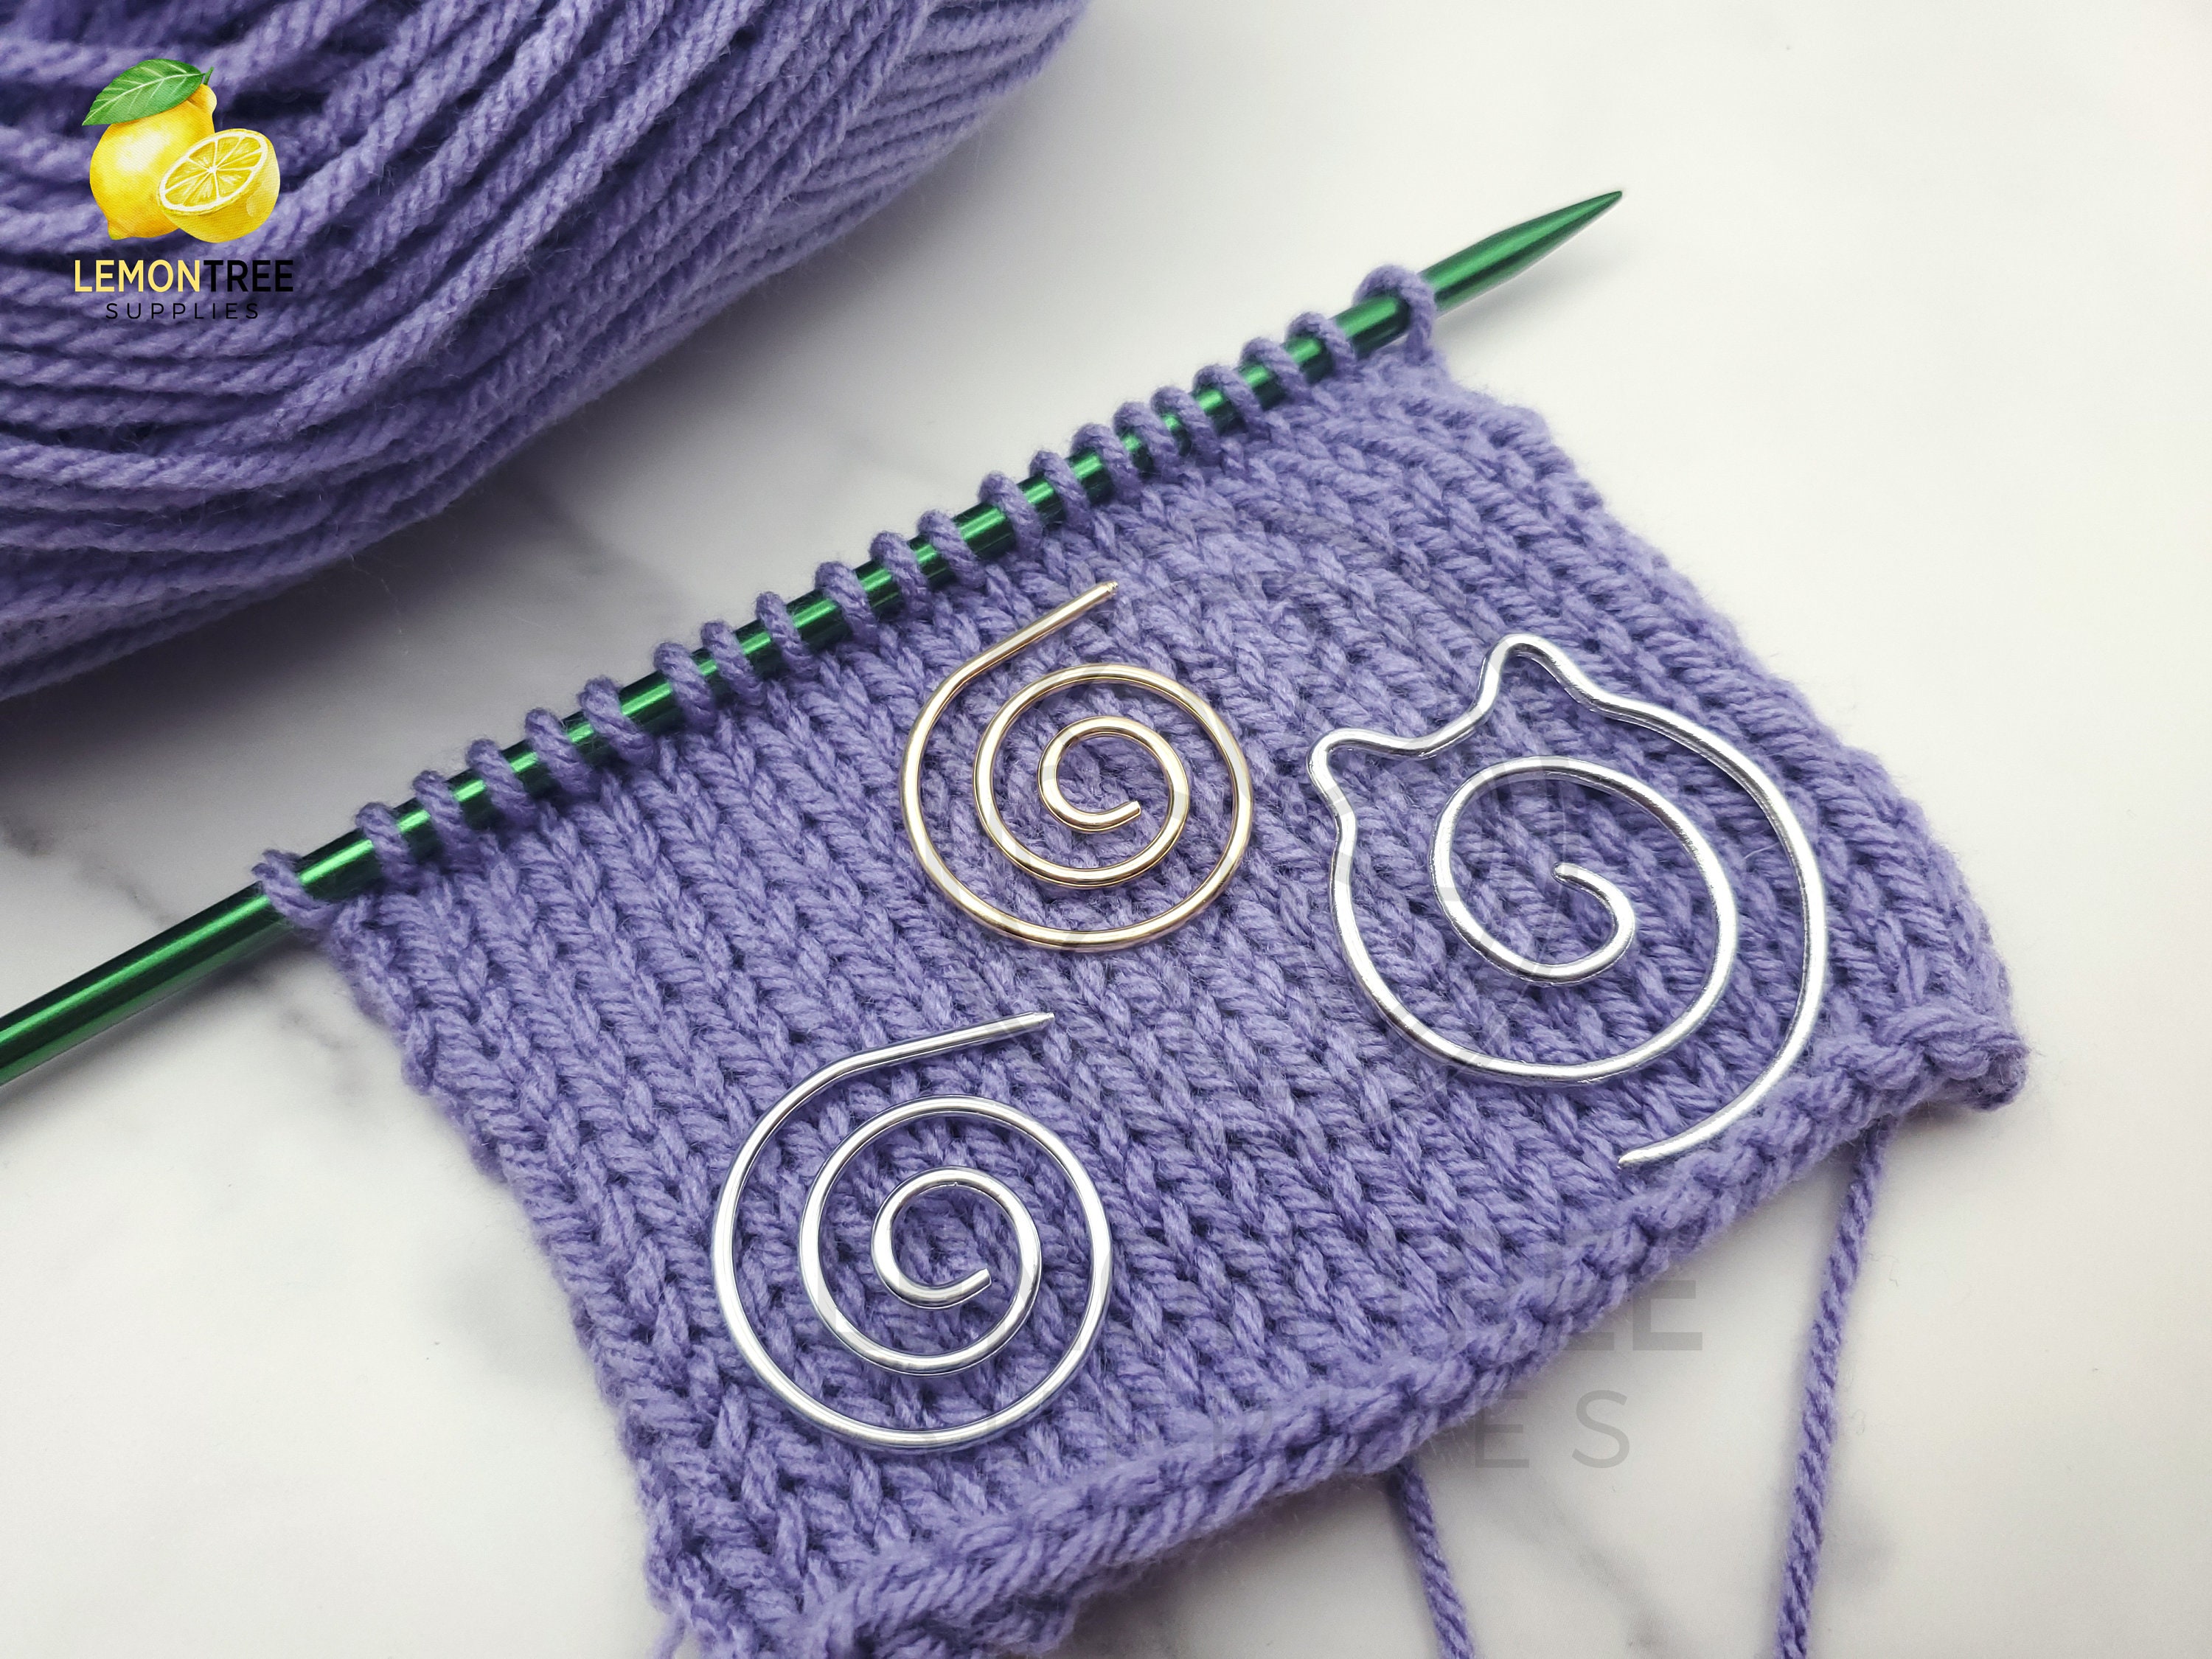 Sunisery Spiral Cable Needle Handmade Knitting Tool Circle Spiral Pin Bent Tapestry  Needles for Yarn Sewing Knitting 